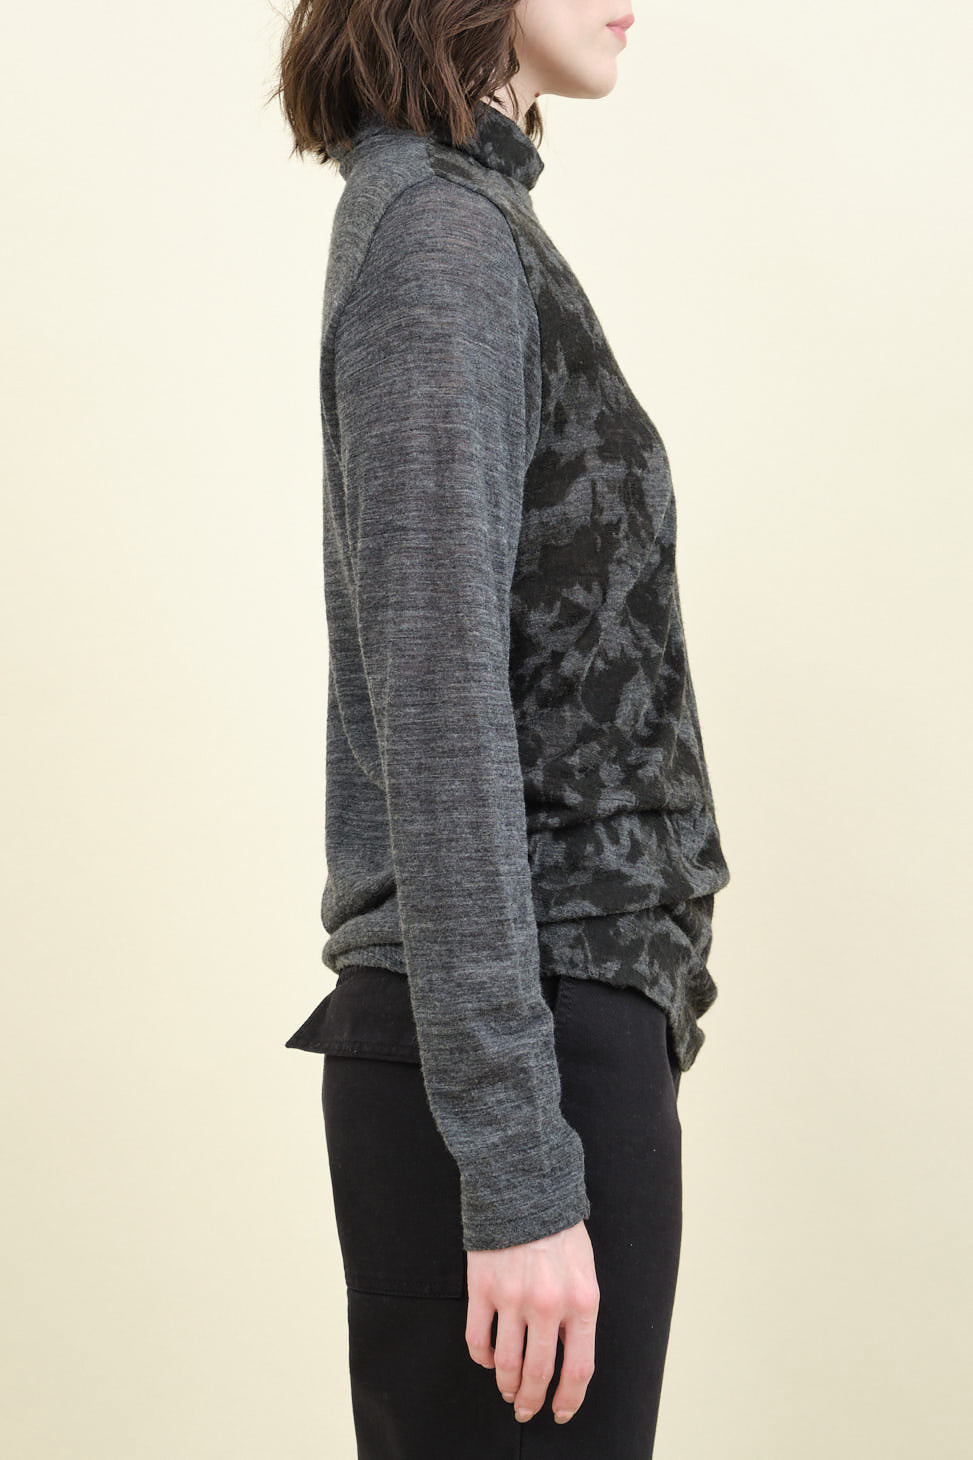 SIde of Winter Leaves Print High Neck Pullover